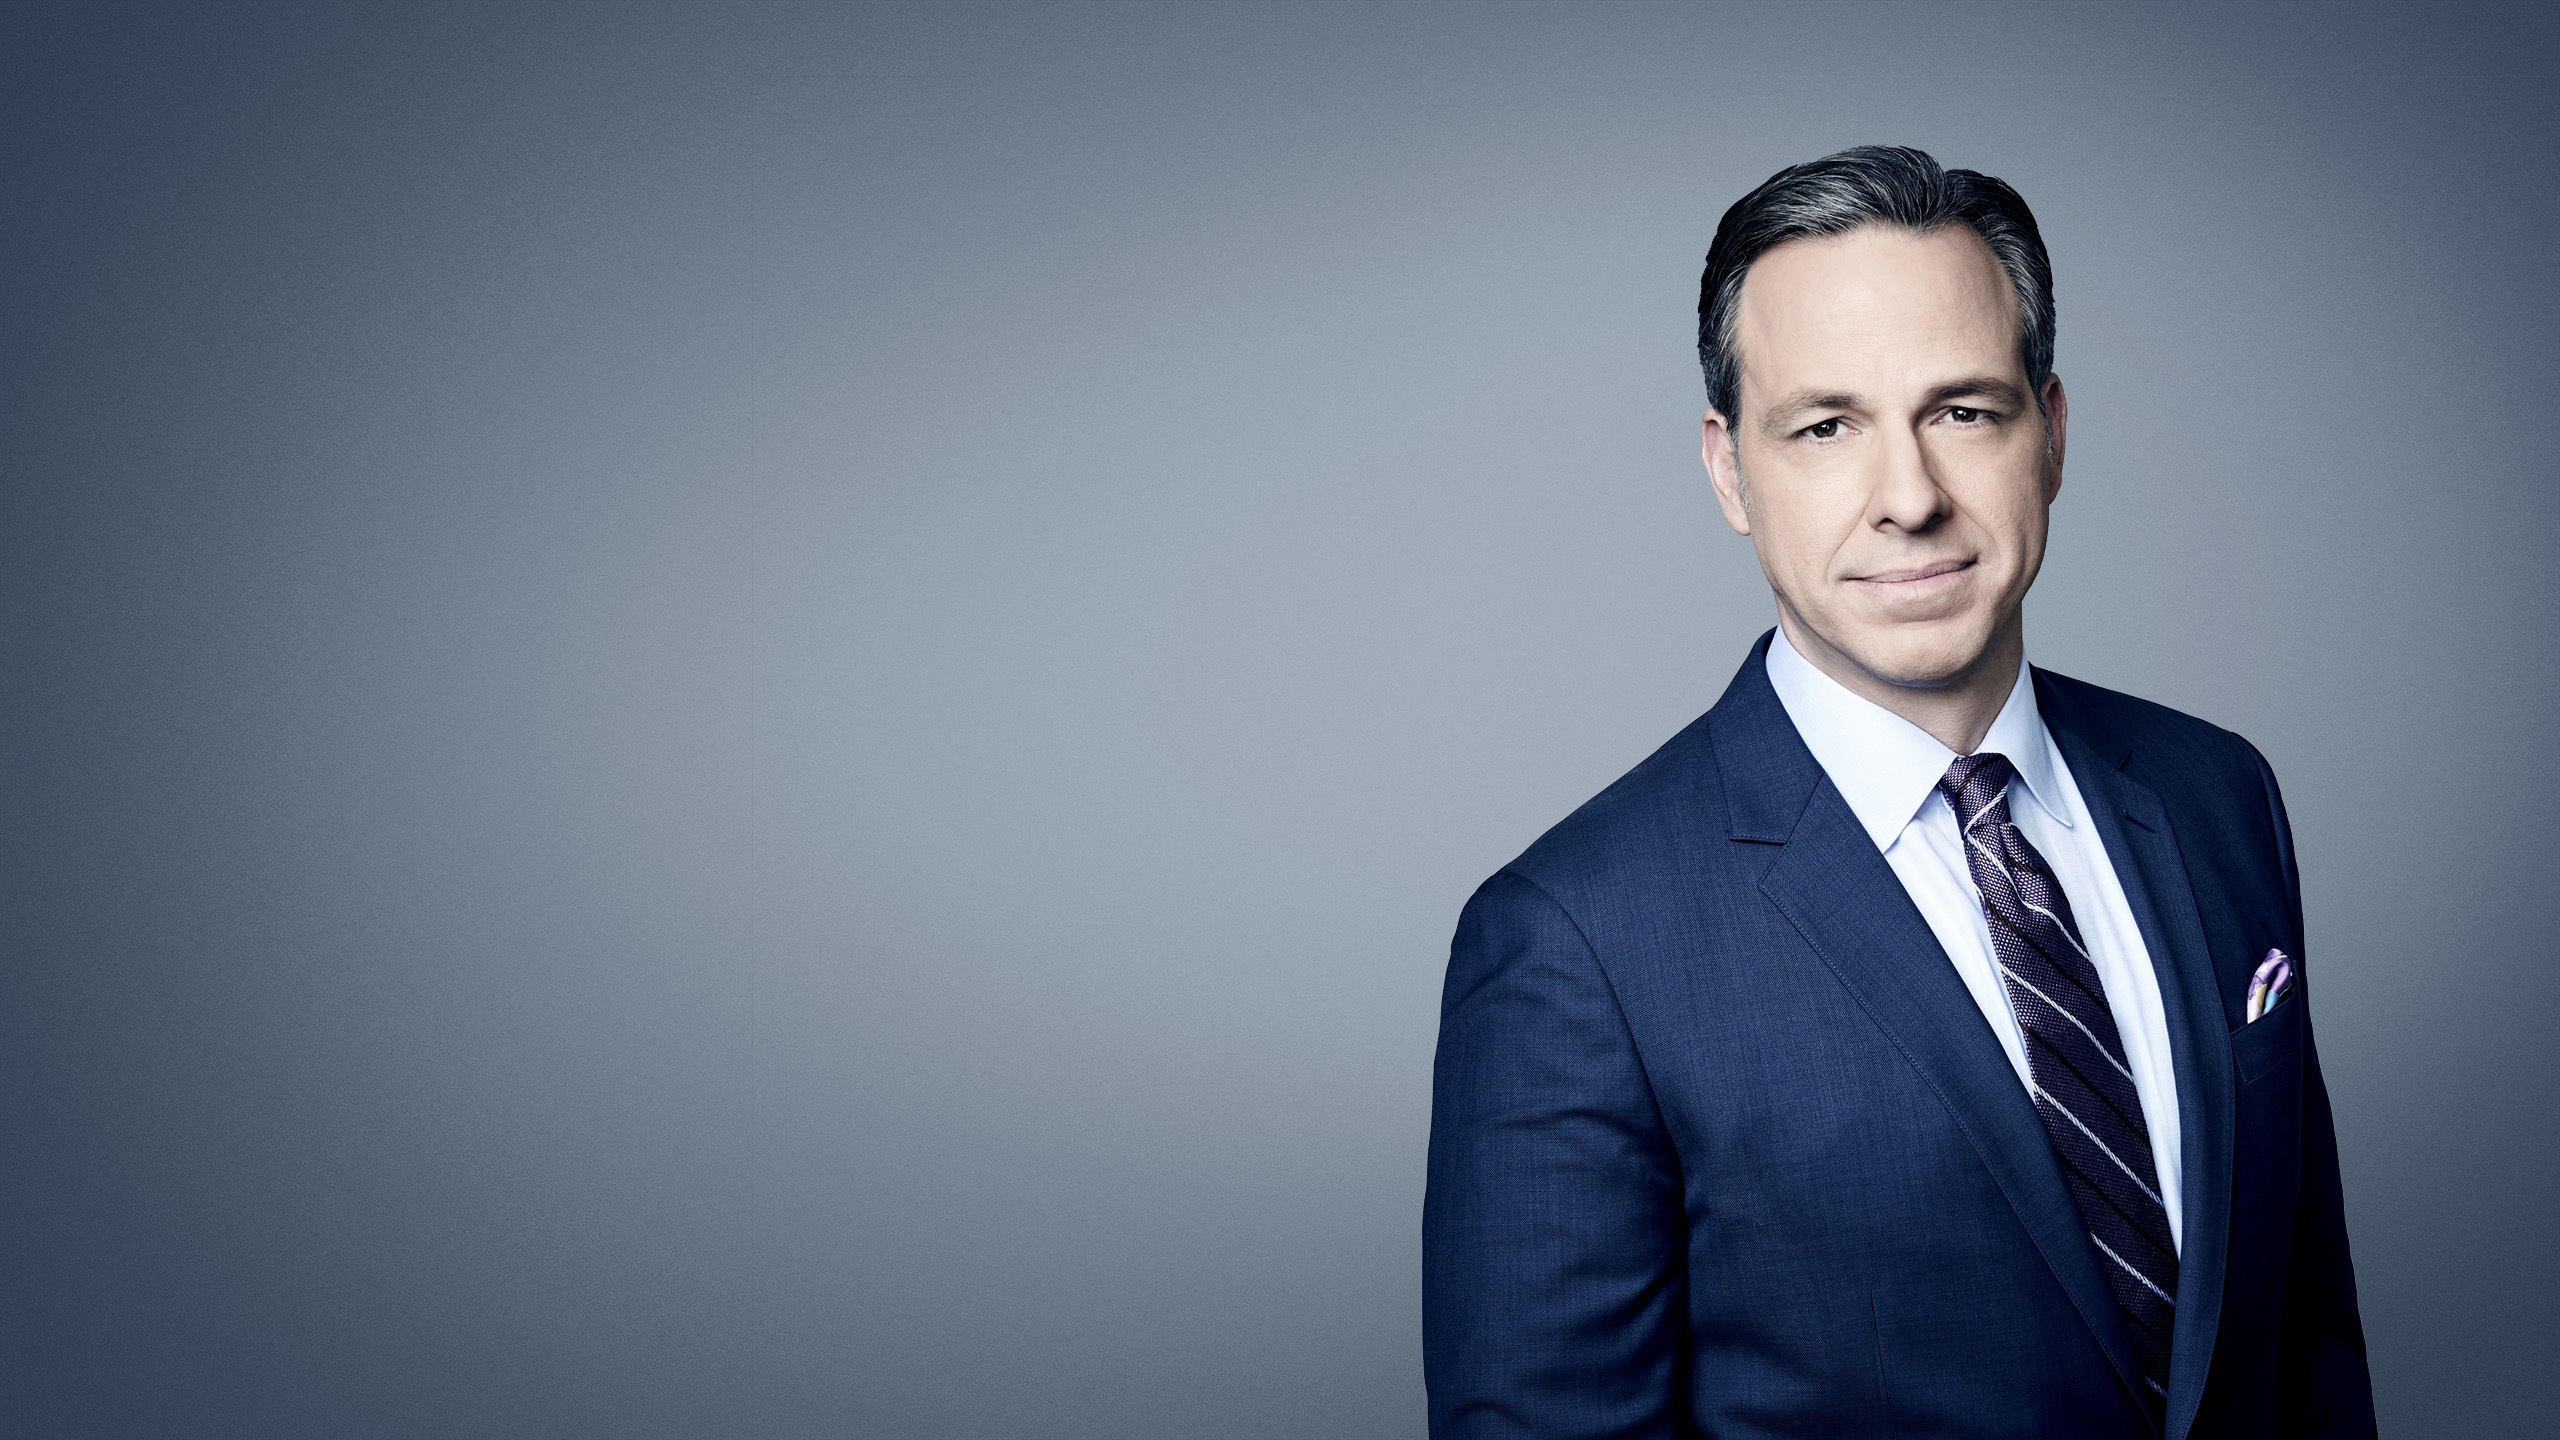 JUST IN: Jake Tapper Will Return to 4 PM Show After Midterms, CNN to Announce Prime Time Plans ‘In The Coming Days’